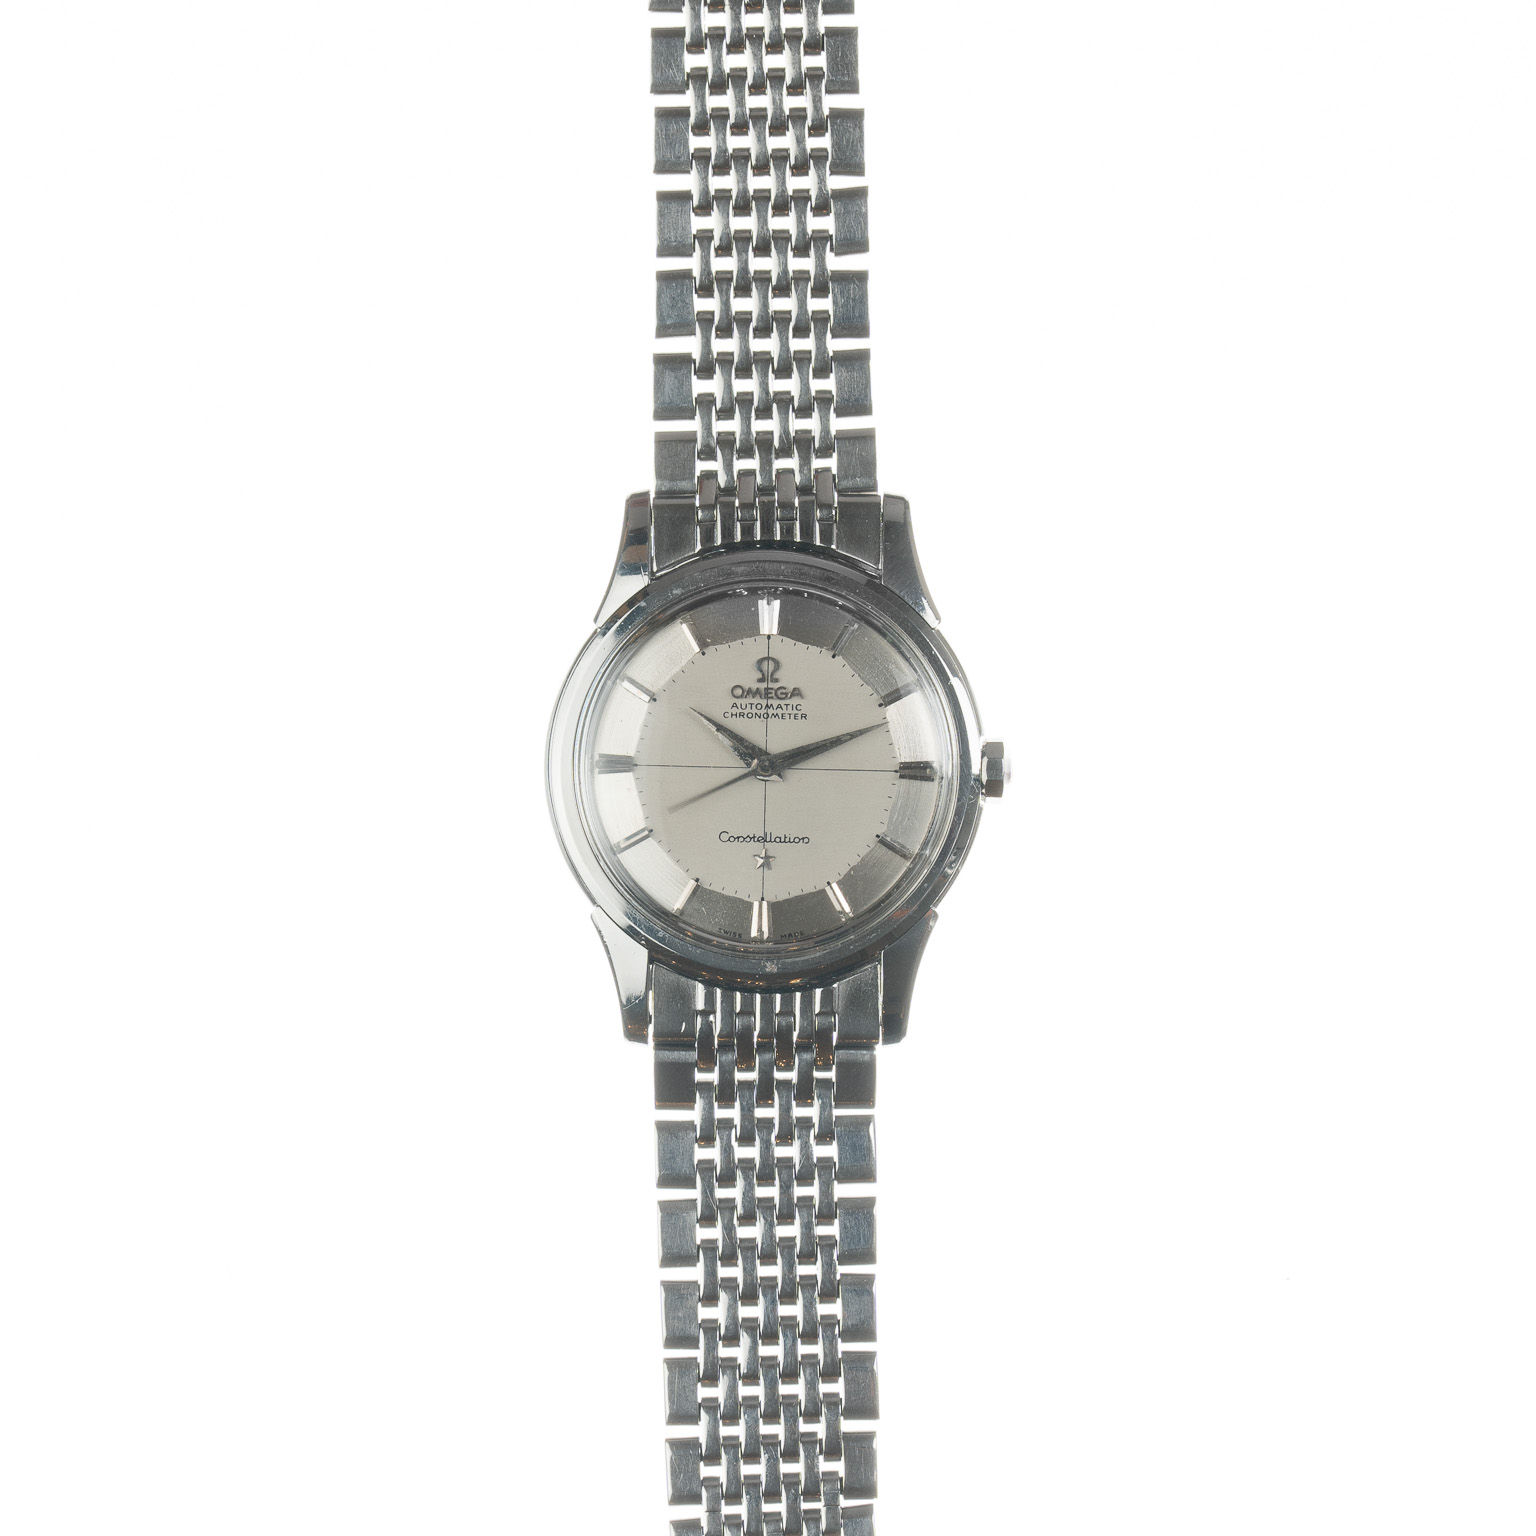 omega constellation 14381 watch from 1959